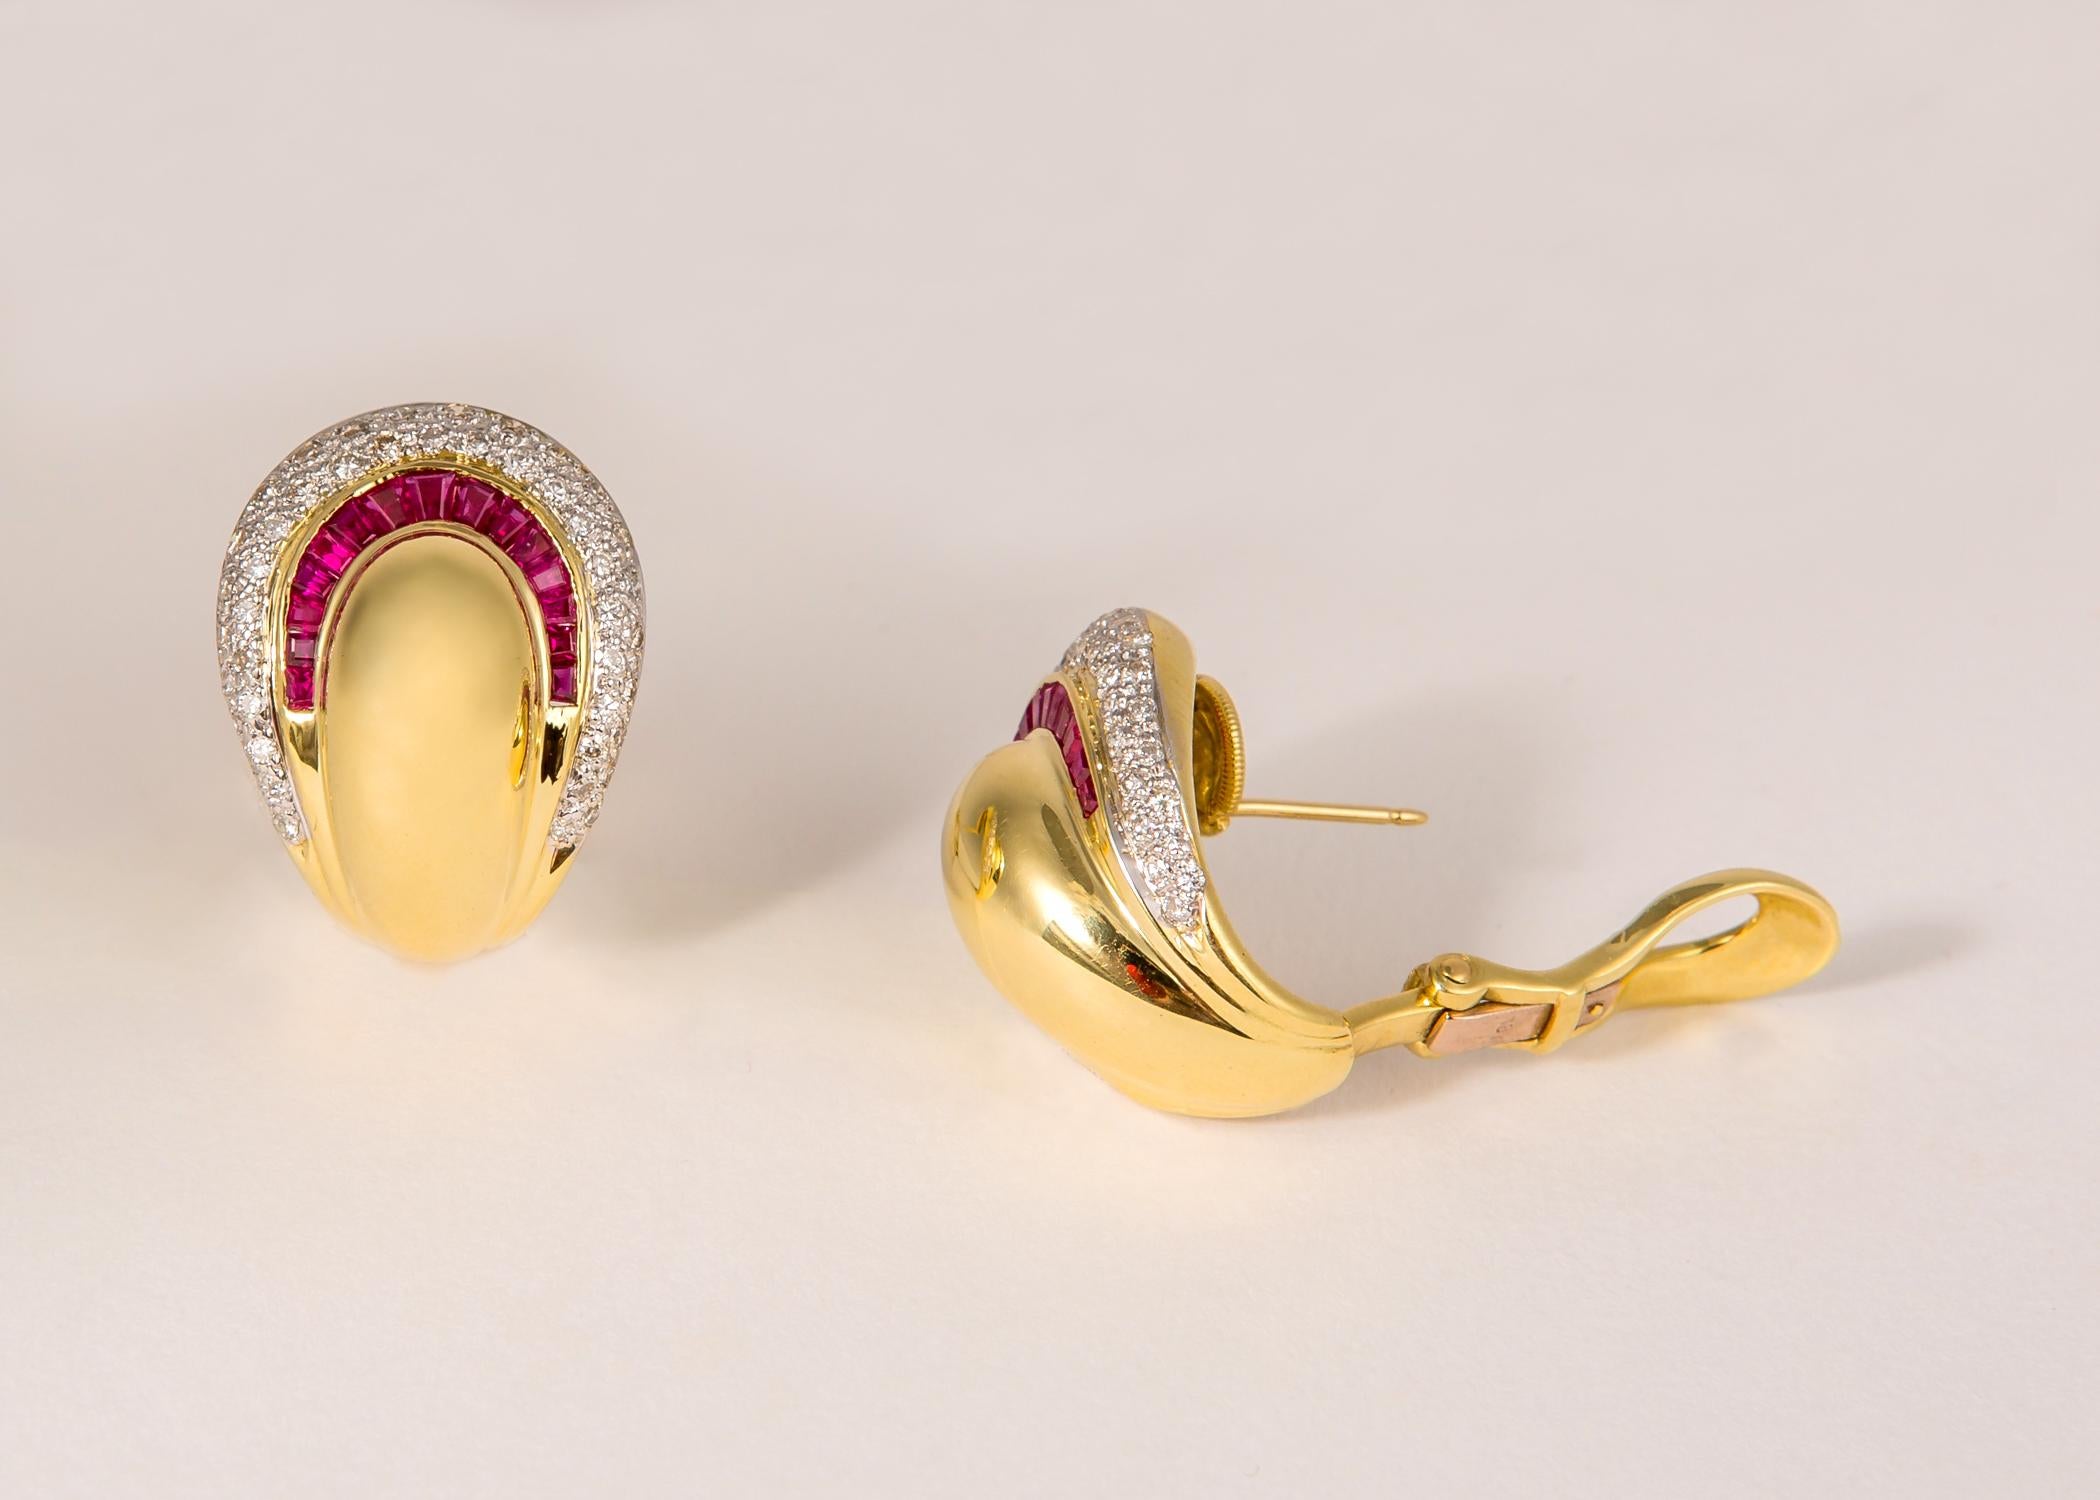 A simple elegant shape created in rich 18k gold and accented with brilliant cut diamonds and baguette cut rubies. This contemporary classic earring can be worn day to night. 1  1/16 of an inch.